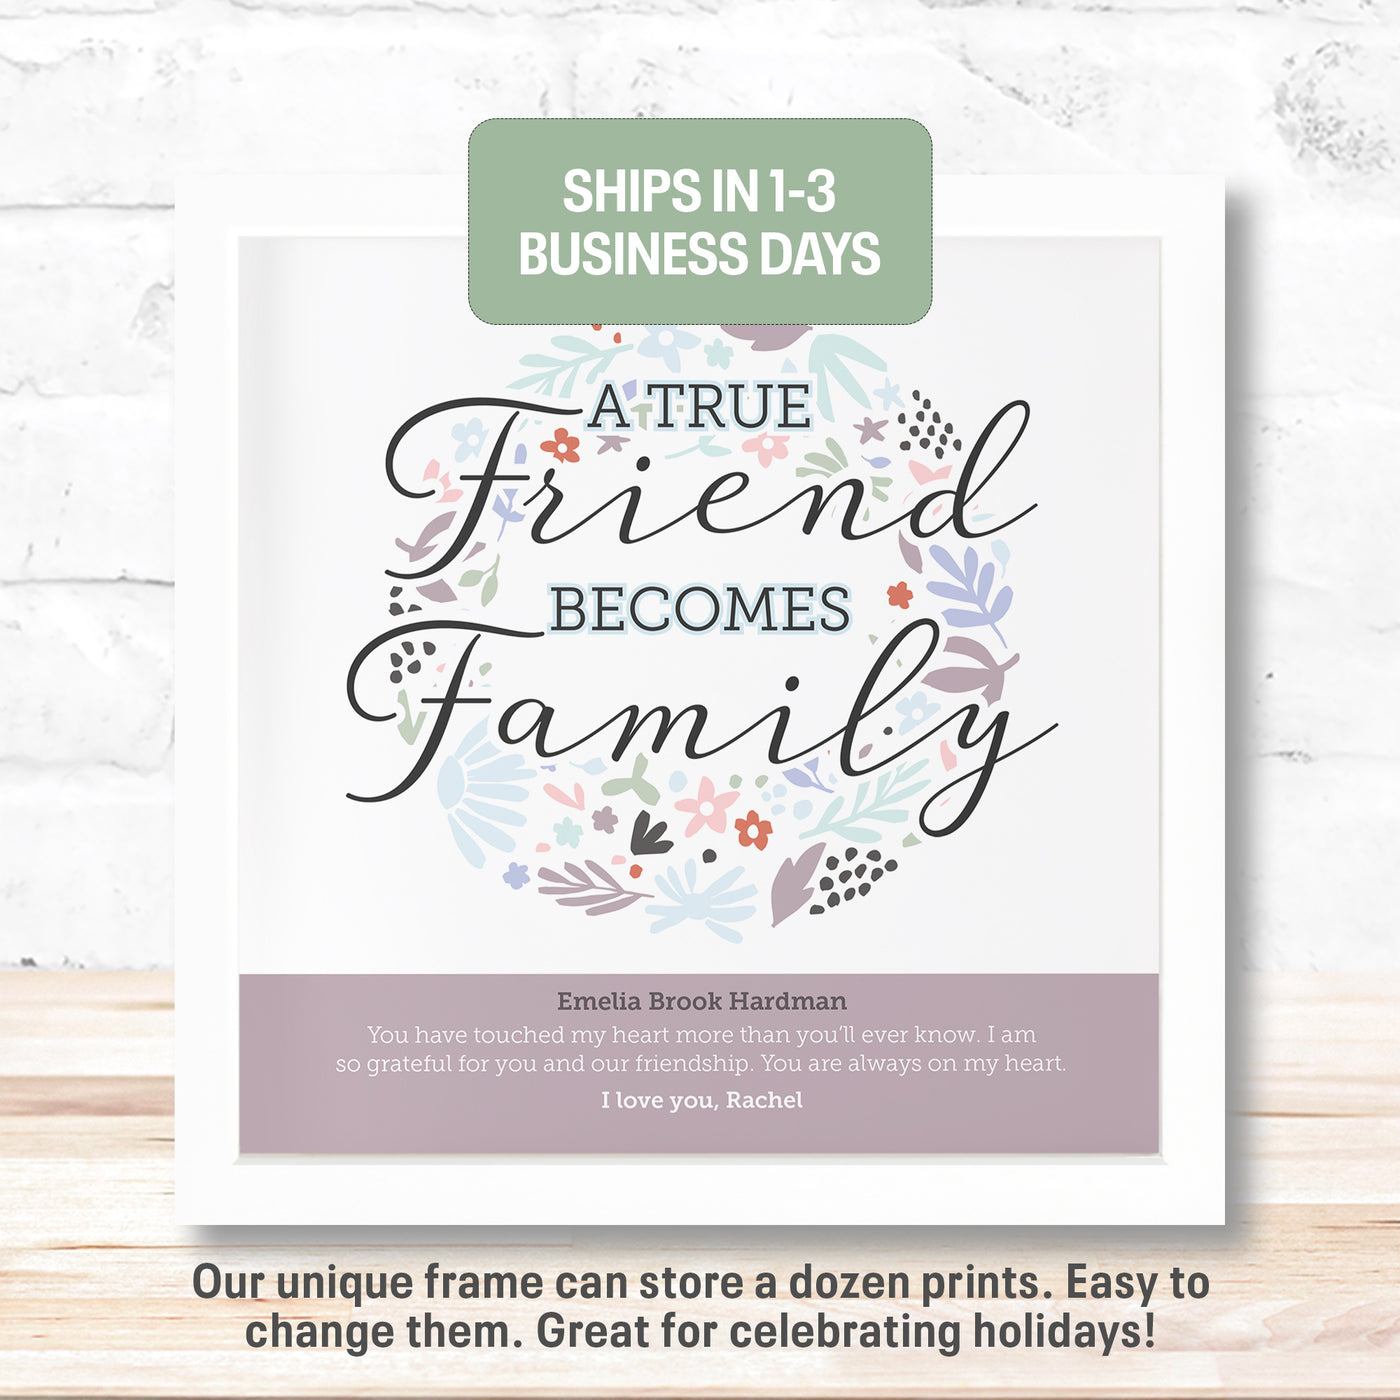 True Friend Becomes Family | Personalized Friendship Print, Wall Decor